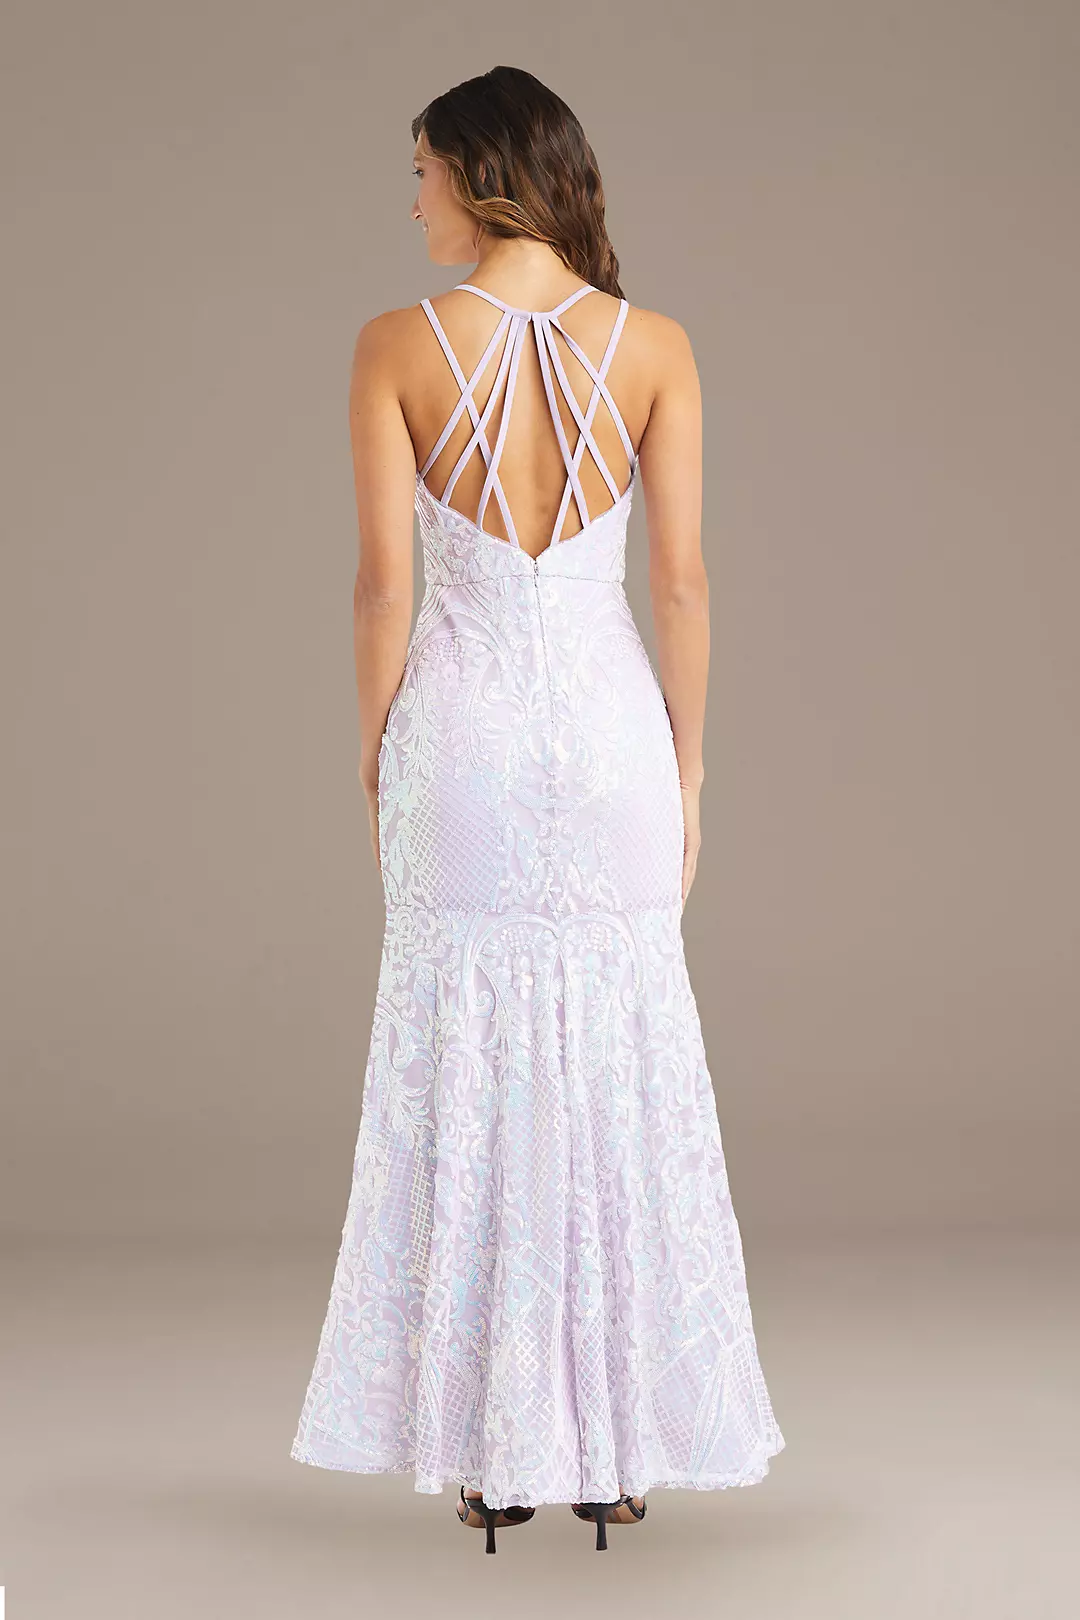 Iridescent Sequin Filigree Gown with Strappy Back Image 2